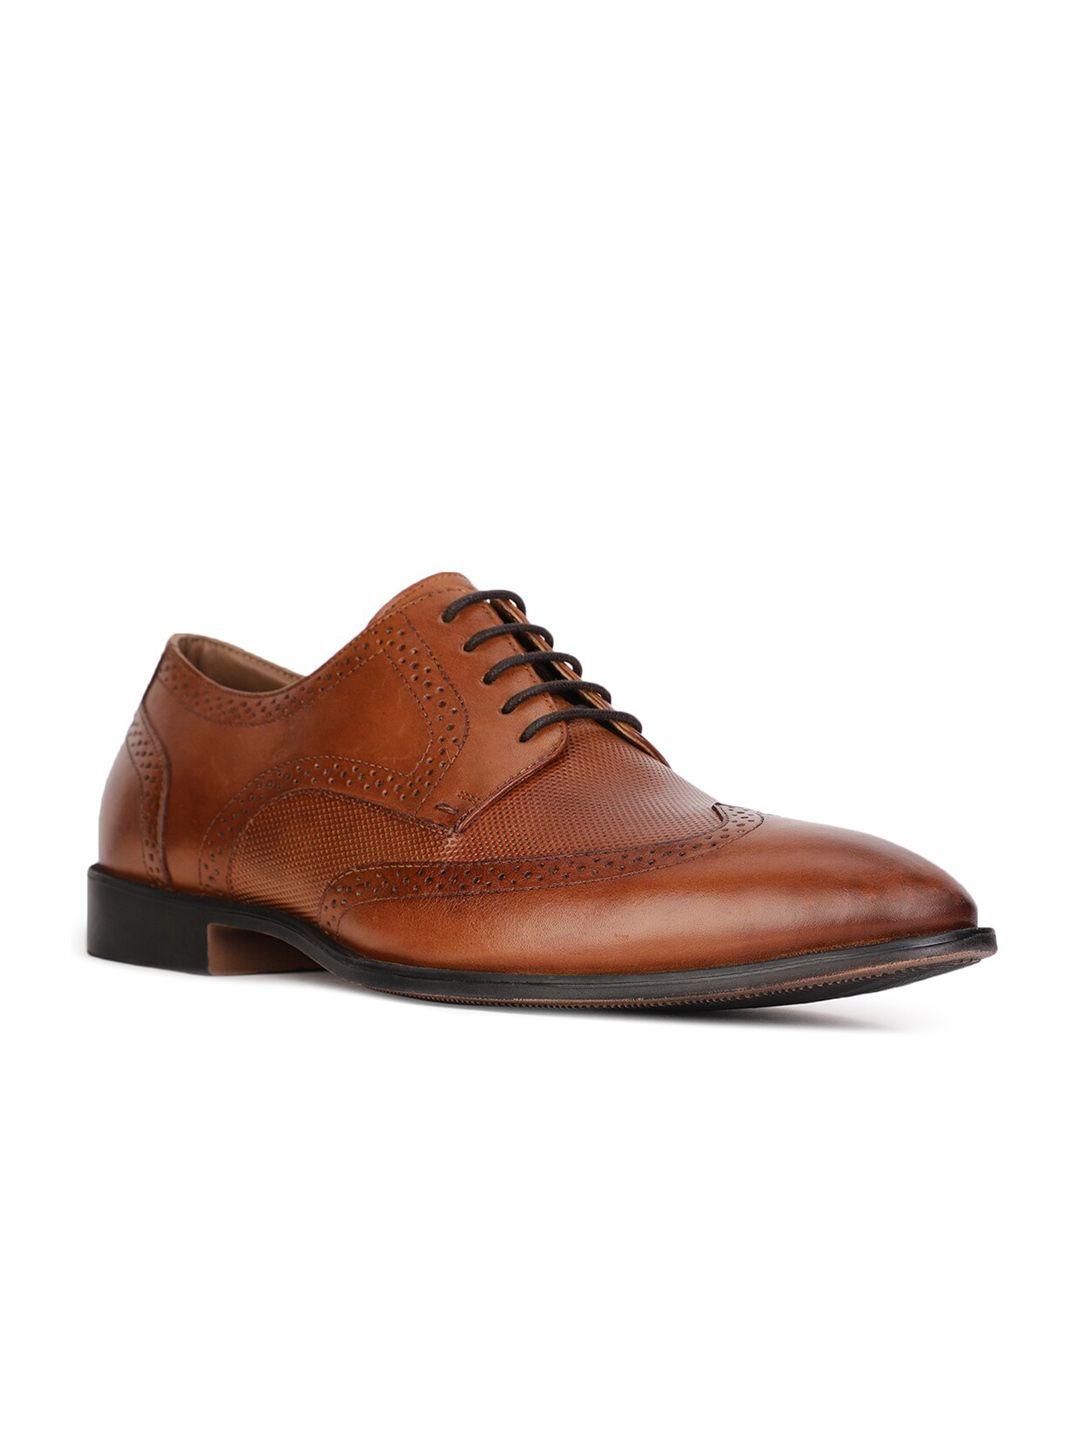 hush-puppies-men-brown-textured-leather-formal-brogues